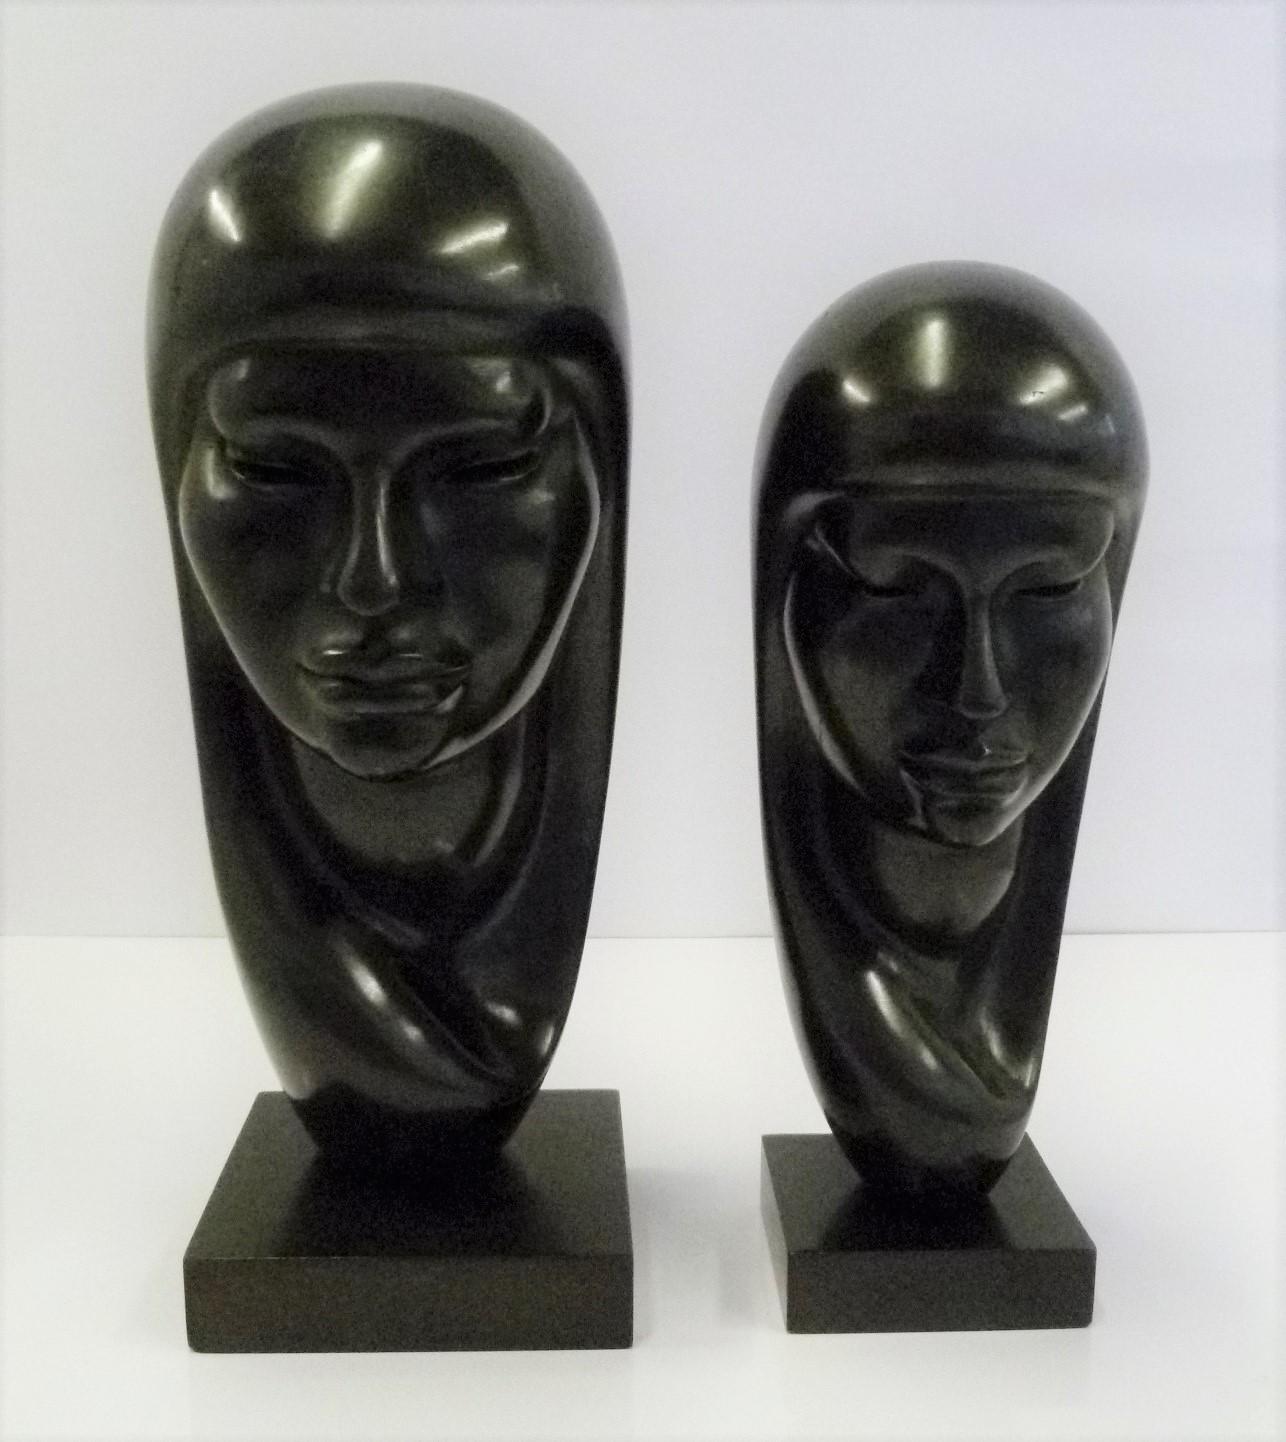 Bolivian wood sculptor G. Arias who was known for his ethnic art themes of the South American Aymara Indians from the 1950s. Two beautifully rendered depictions of native shrouded women hand carved in ebonized wood in two sizes. With a lovely smooth